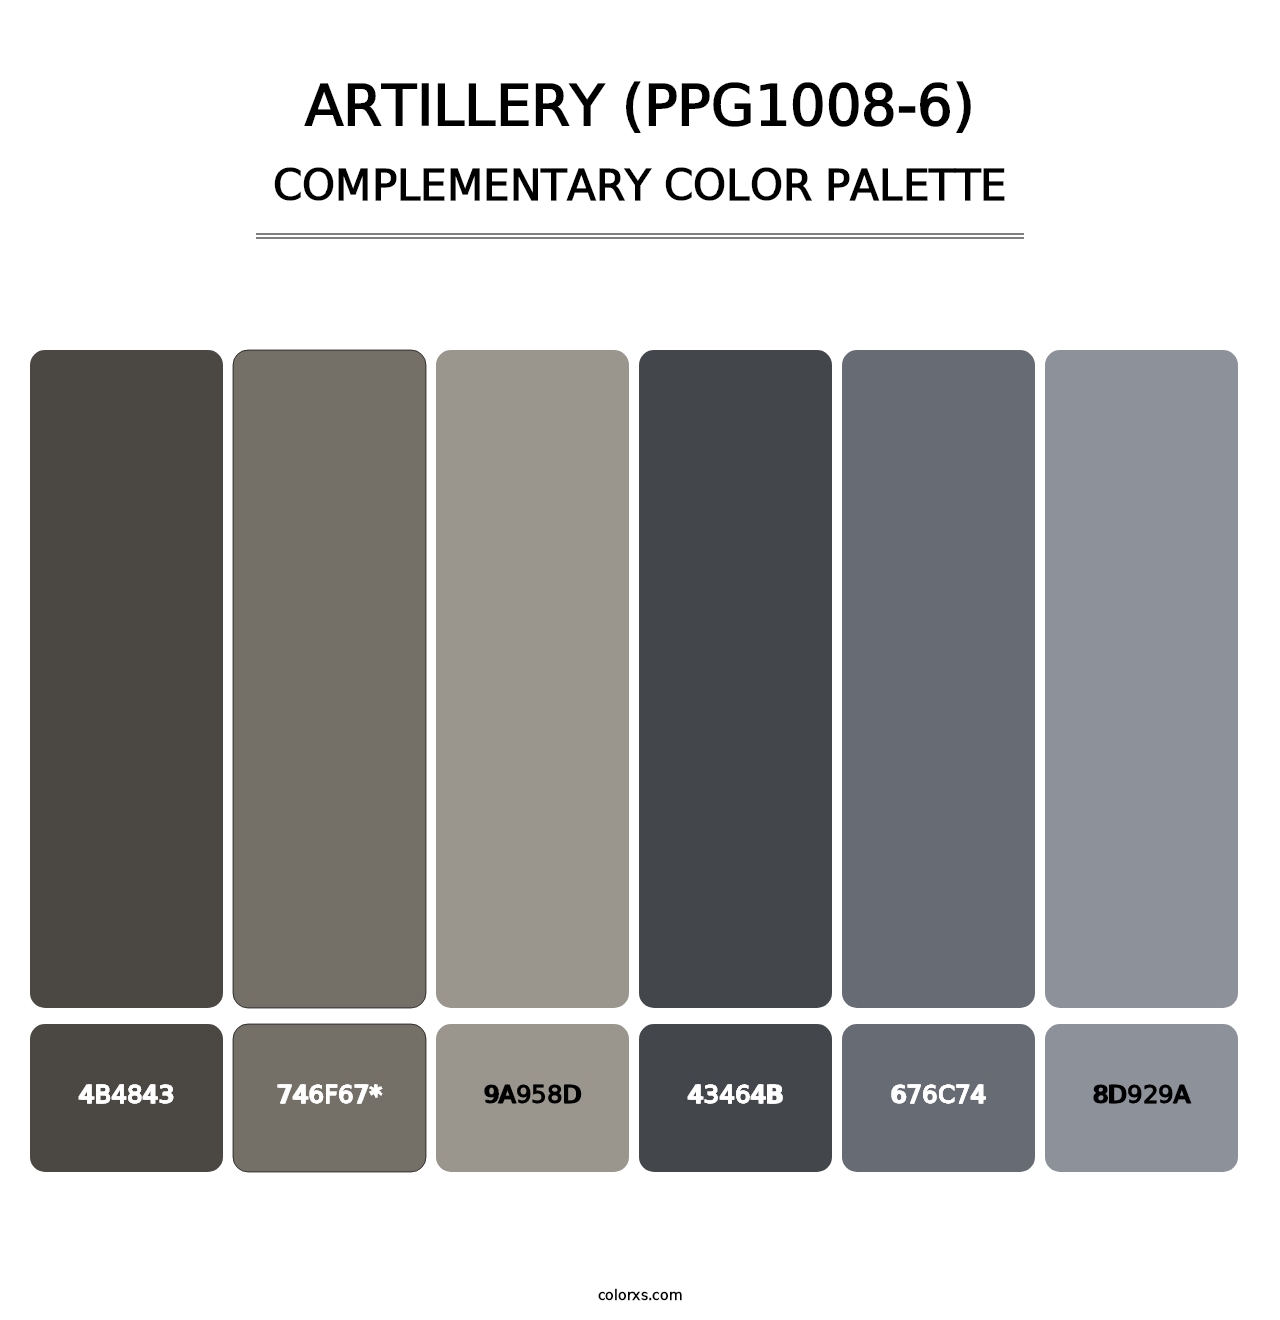 Artillery (PPG1008-6) - Complementary Color Palette